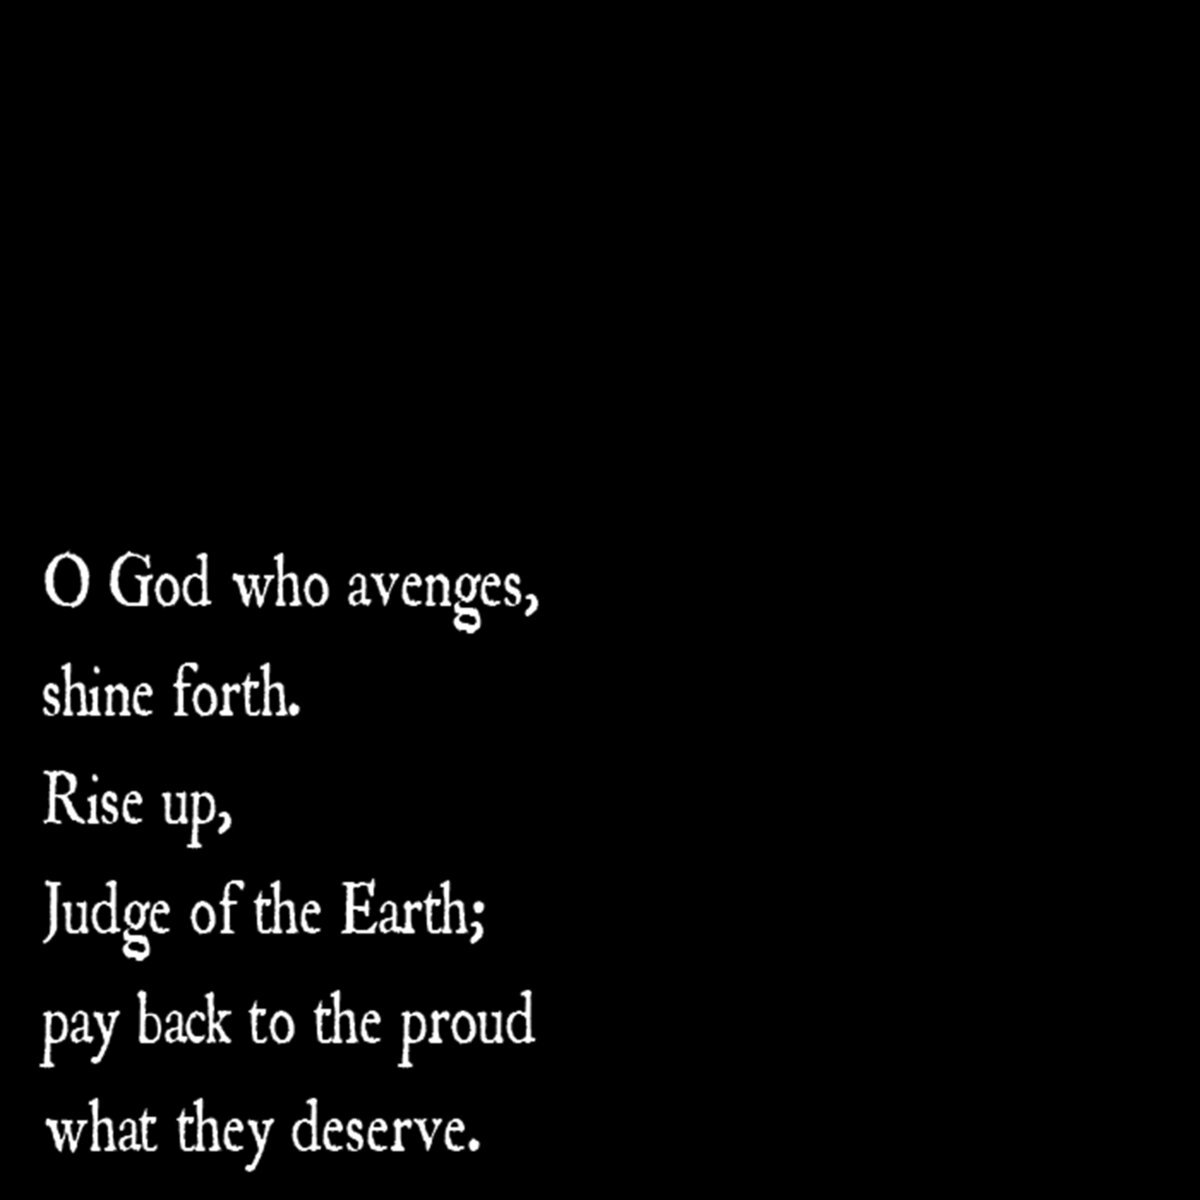 O God who avenges, shine forth. Rise up, Judge of the Earth; pay back to the proud what they deserve. - THE BODY